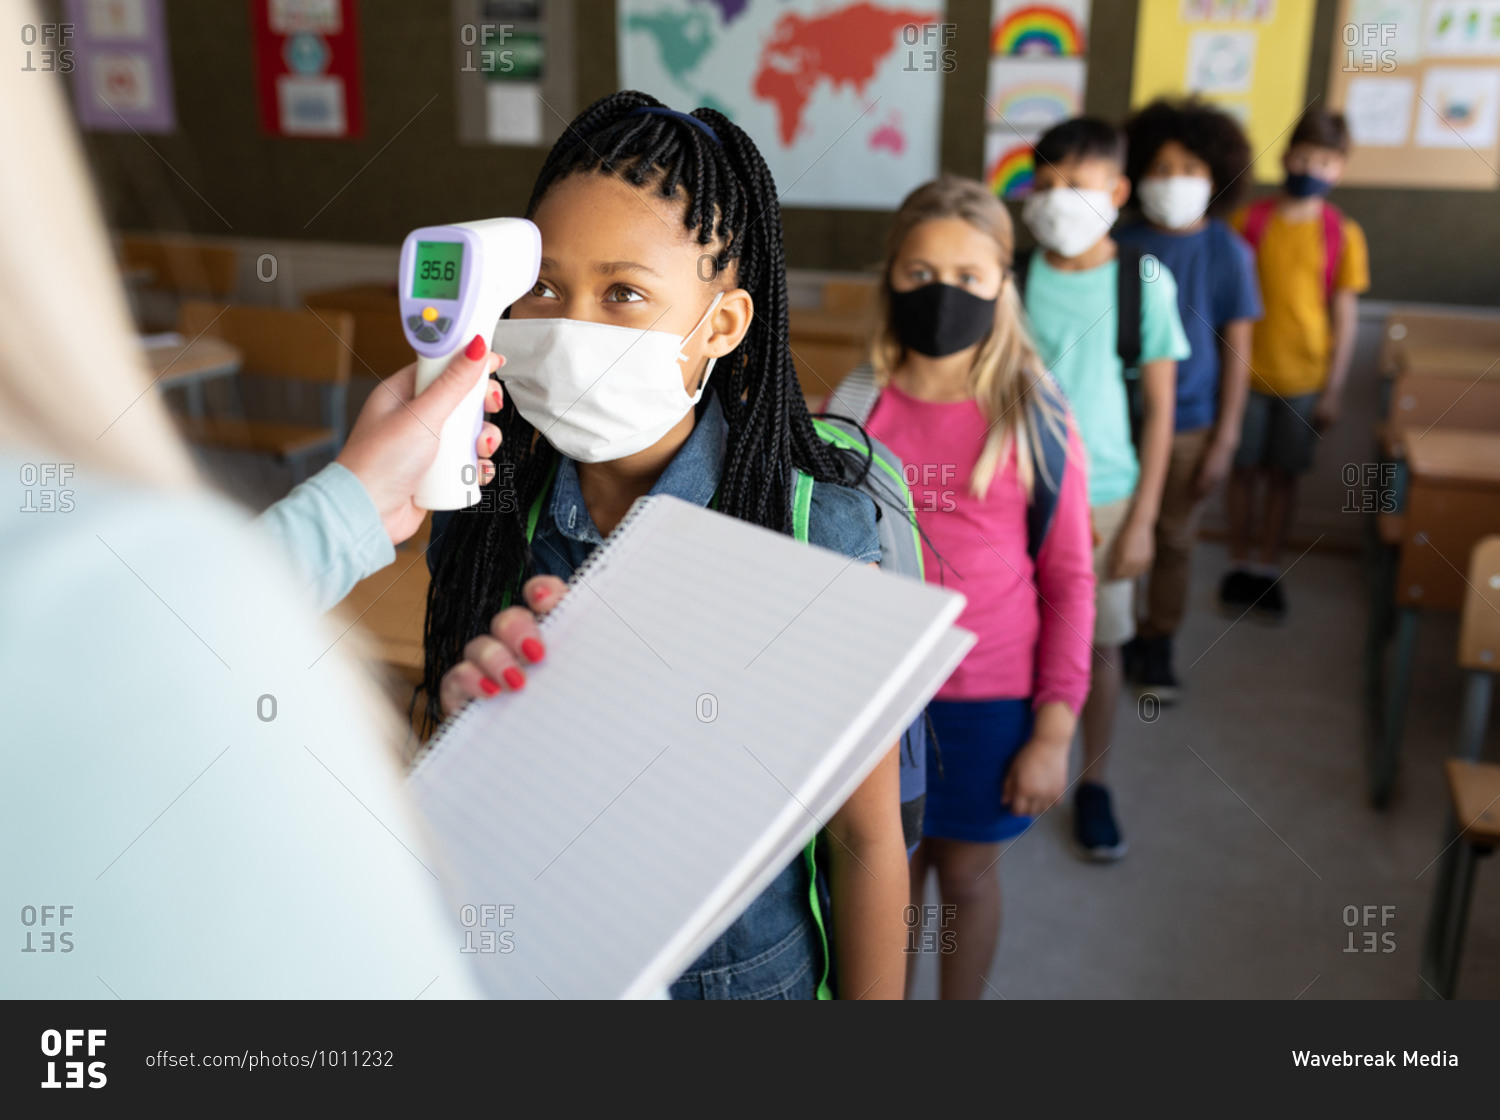 Caucasian female teacher measuring temperature of children in an elementary school. Primary education social distancing health safety during Covid19 Coronavirus pandemic.